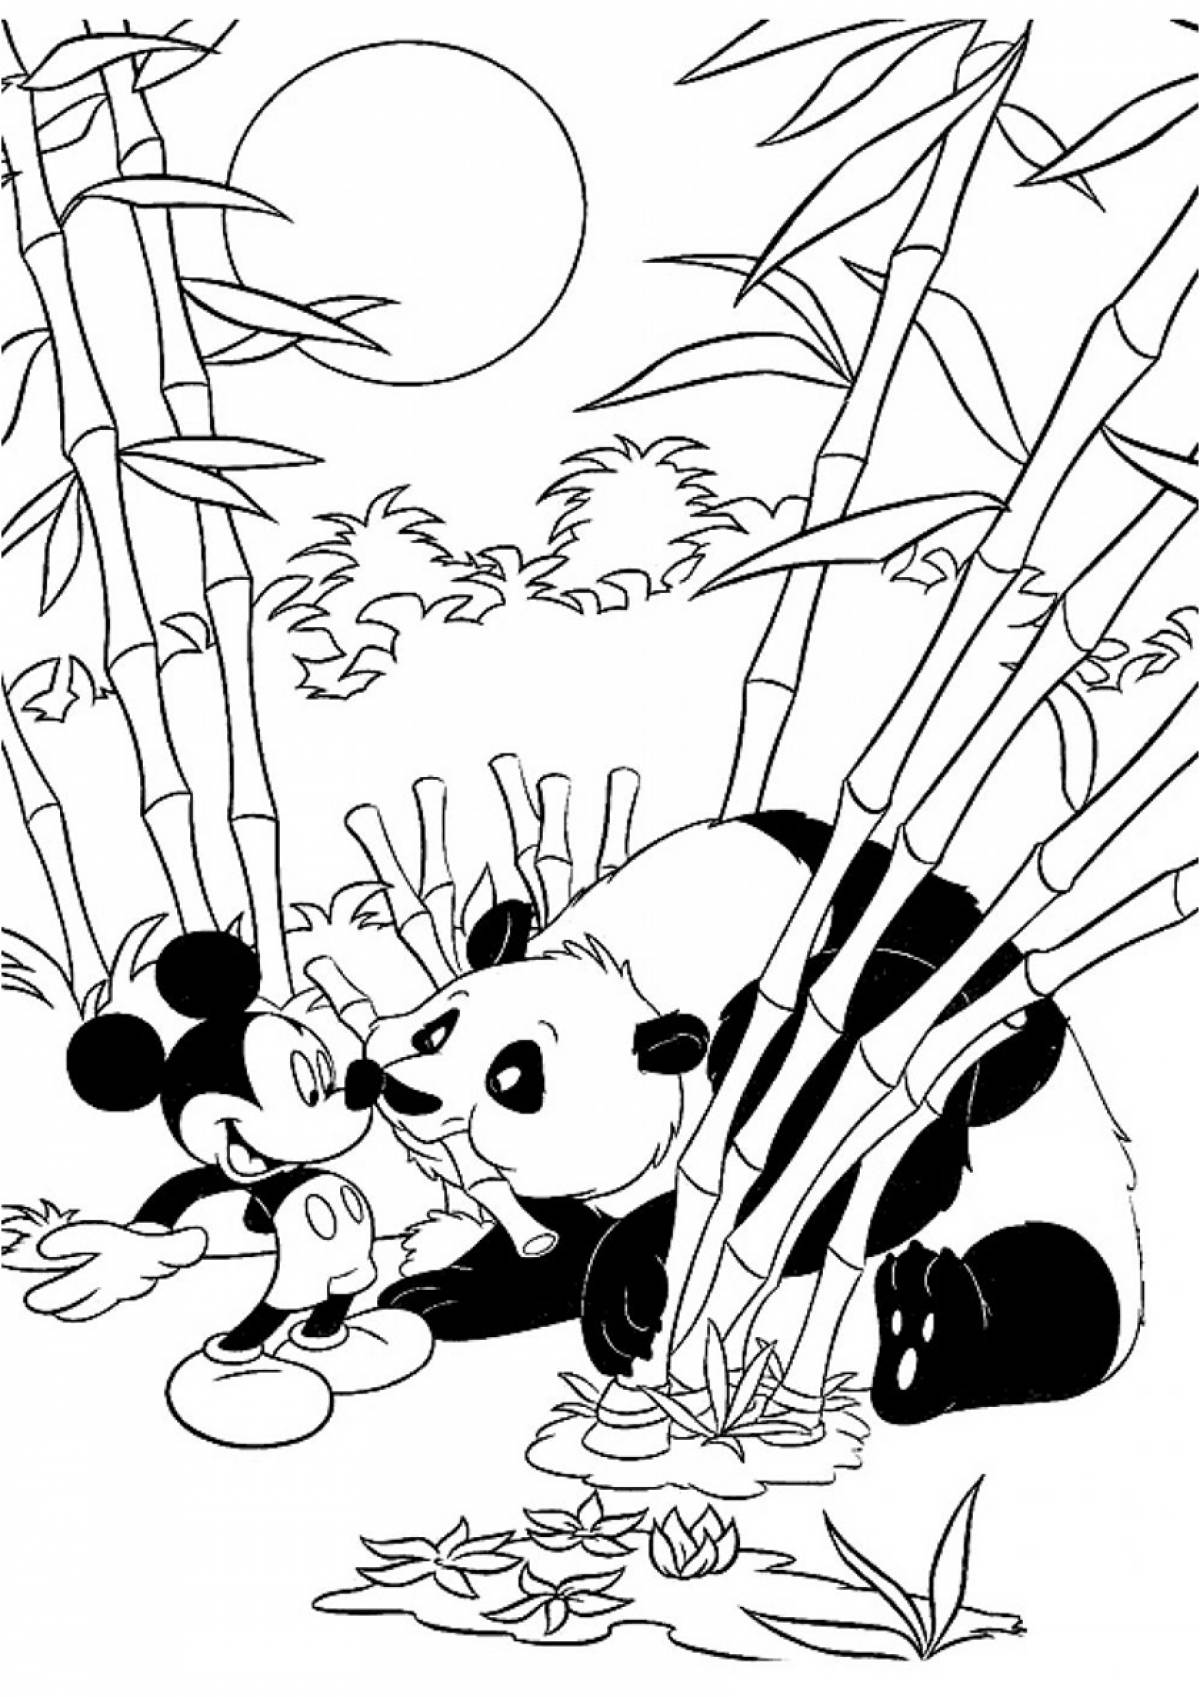 Bamboo and mouse